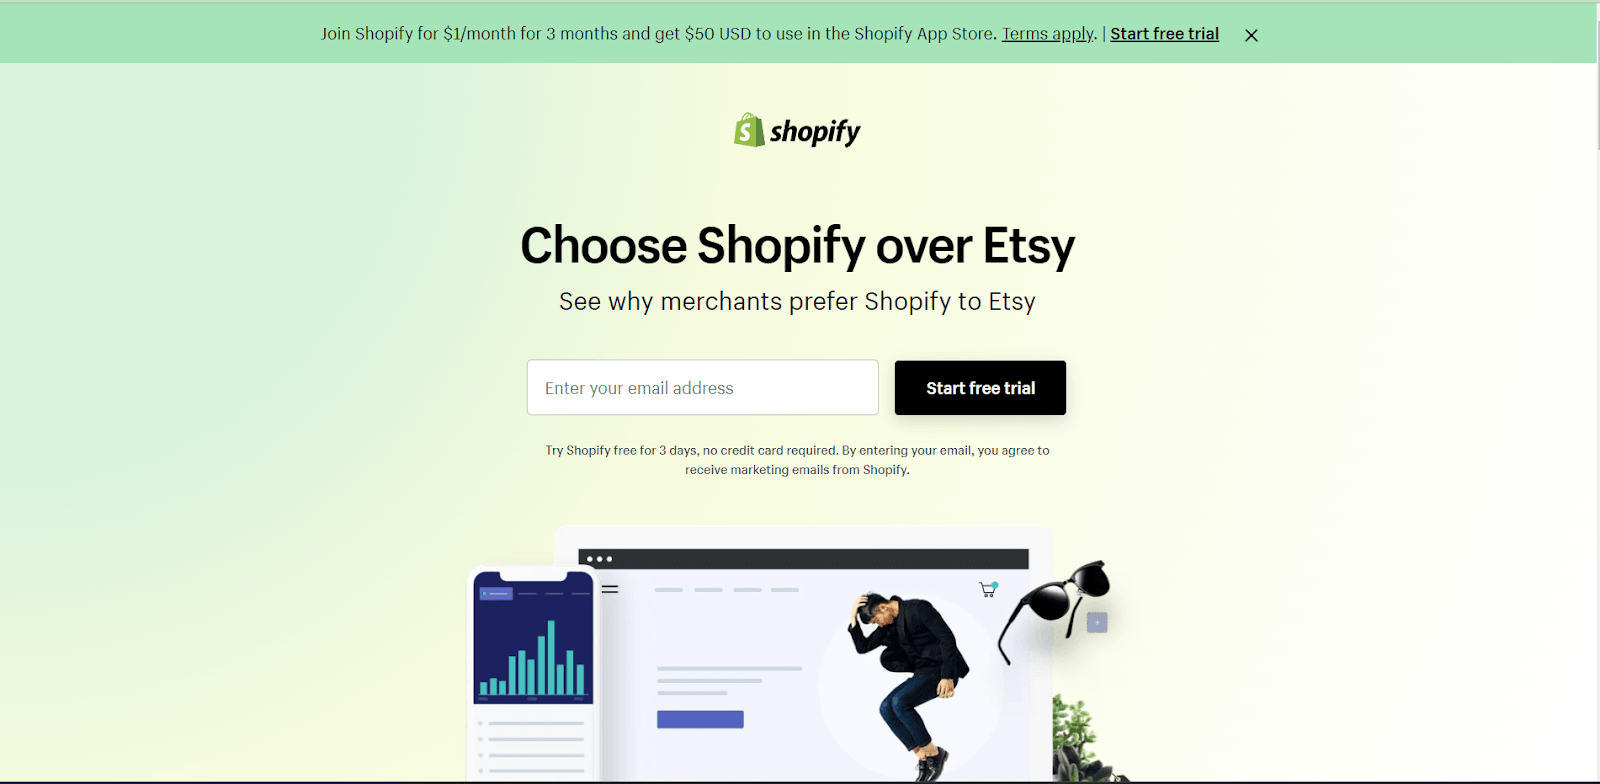 Shopify asks visitors to sign up for a free trial to their software